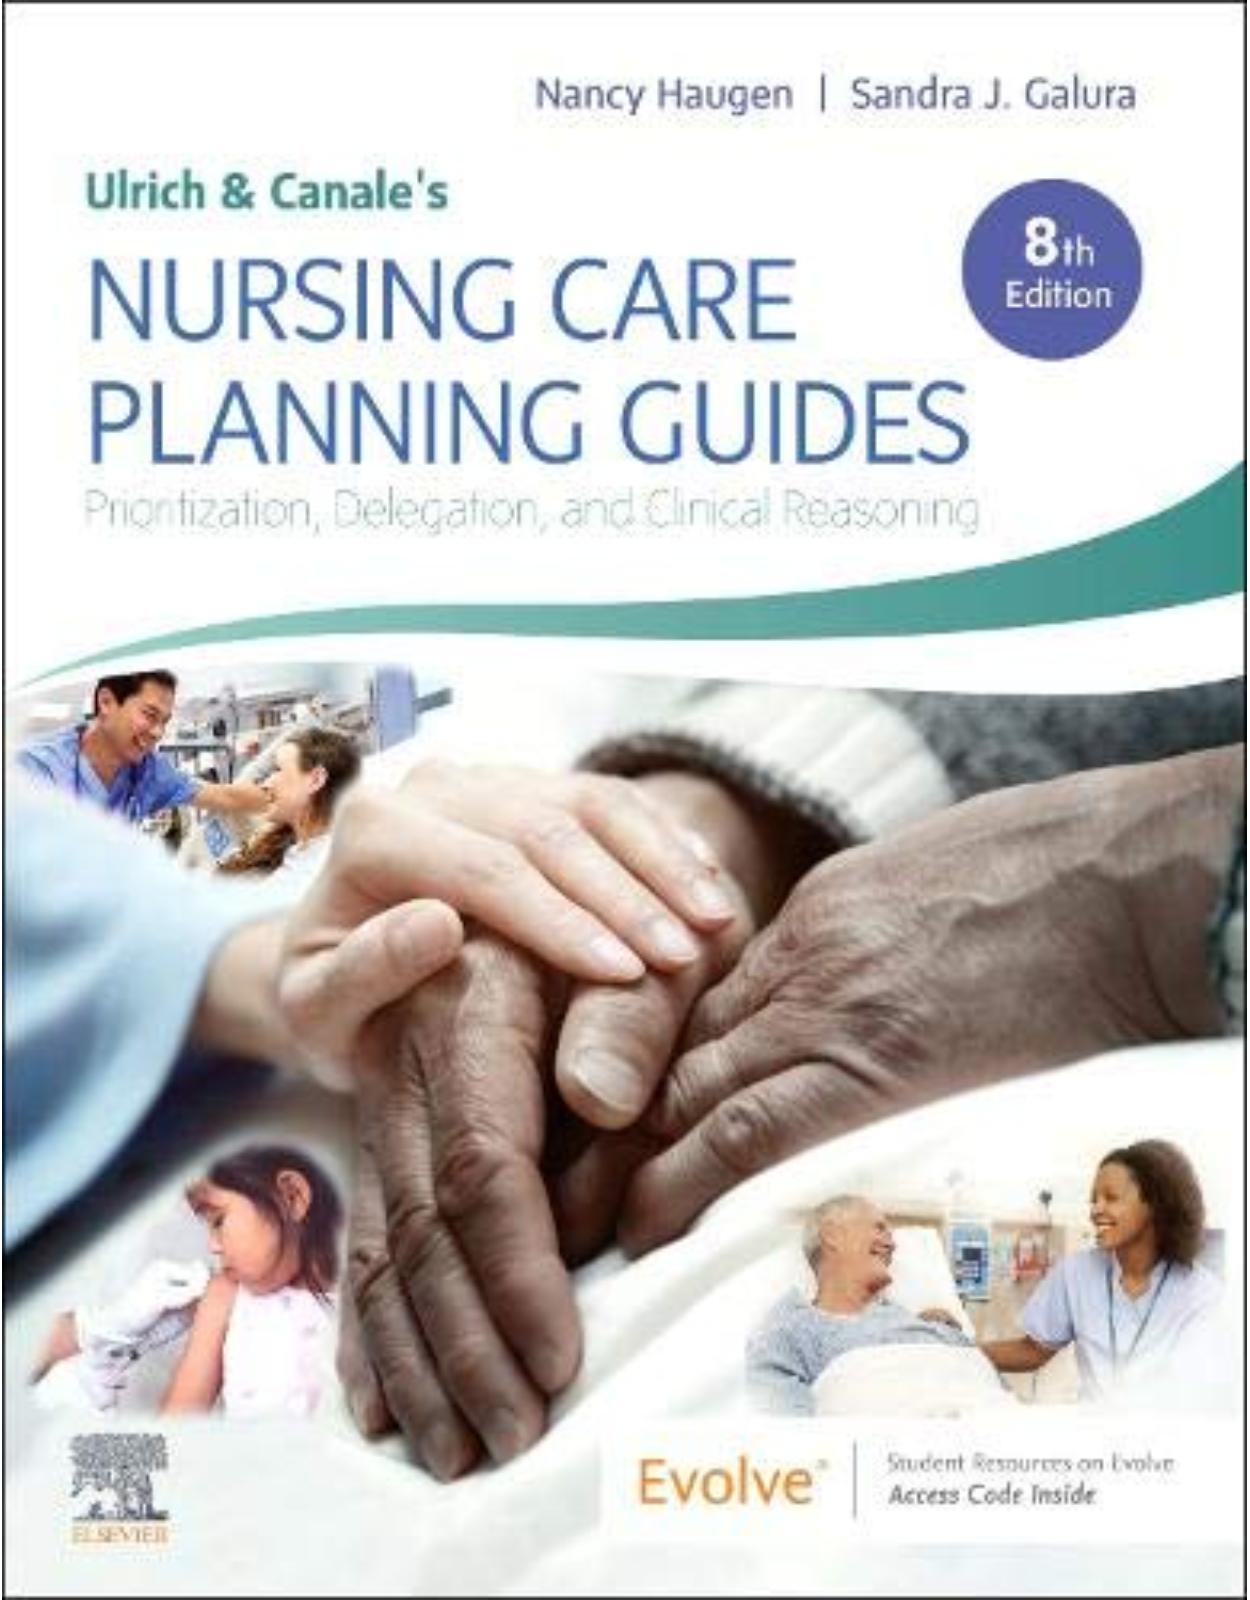 Ulrich & Canale’s Nursing Care Planning Guides: Prioritization, Delegation, and Clinical Reasoning